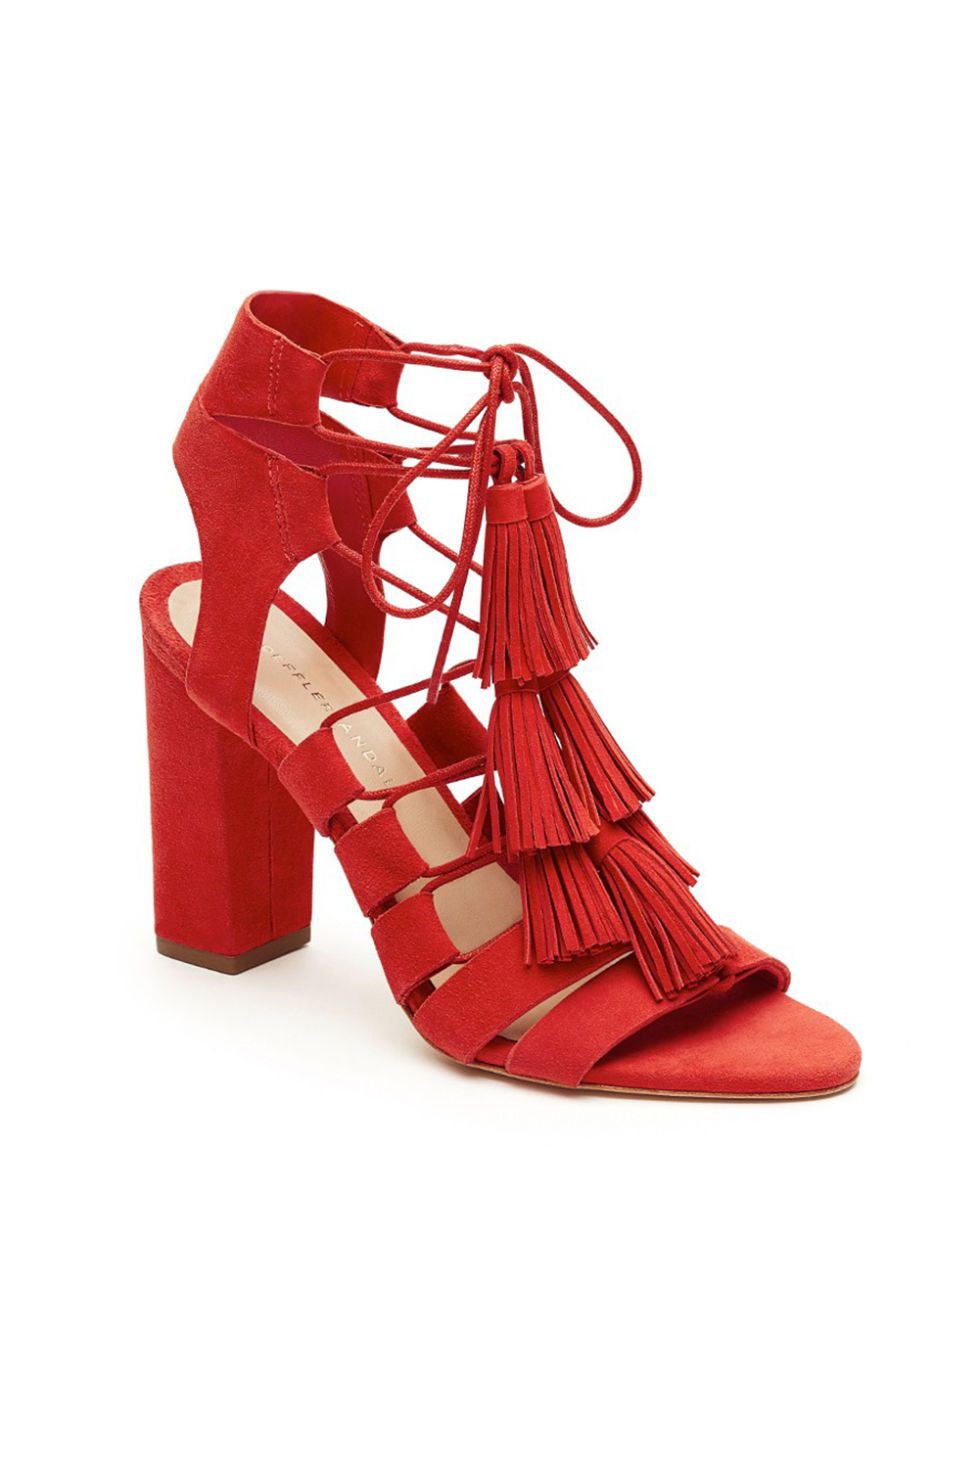 <p>The lace-up tassels keep them fun and flirty.&nbsp;</p><p><span class="redactor-invisible-space" data-verified="redactor" data-redactor-tag="span" data-redactor-class="redactor-invisible-space"></span></p><p><span class="redactor-invisible-space" data-verified="redactor" data-redactor-tag="span" data-redactor-class="redactor-invisible-space"><br><br>
Luz Lace-Up Sandal, $395; <a href="https://www.loefflerrandall.com/index.php/luz-kst-flame.html " target="_blank" data-tracking-id="recirc-text-link">loefflerrandall.com </a><span class="redactor-invisible-space" data-verified="redactor" data-redactor-tag="span" data-redactor-class="redactor-invisible-space"><a href="https://www.loefflerrandall.com/index.php/luz-kst-flame.html "></a></span><br></span></p>